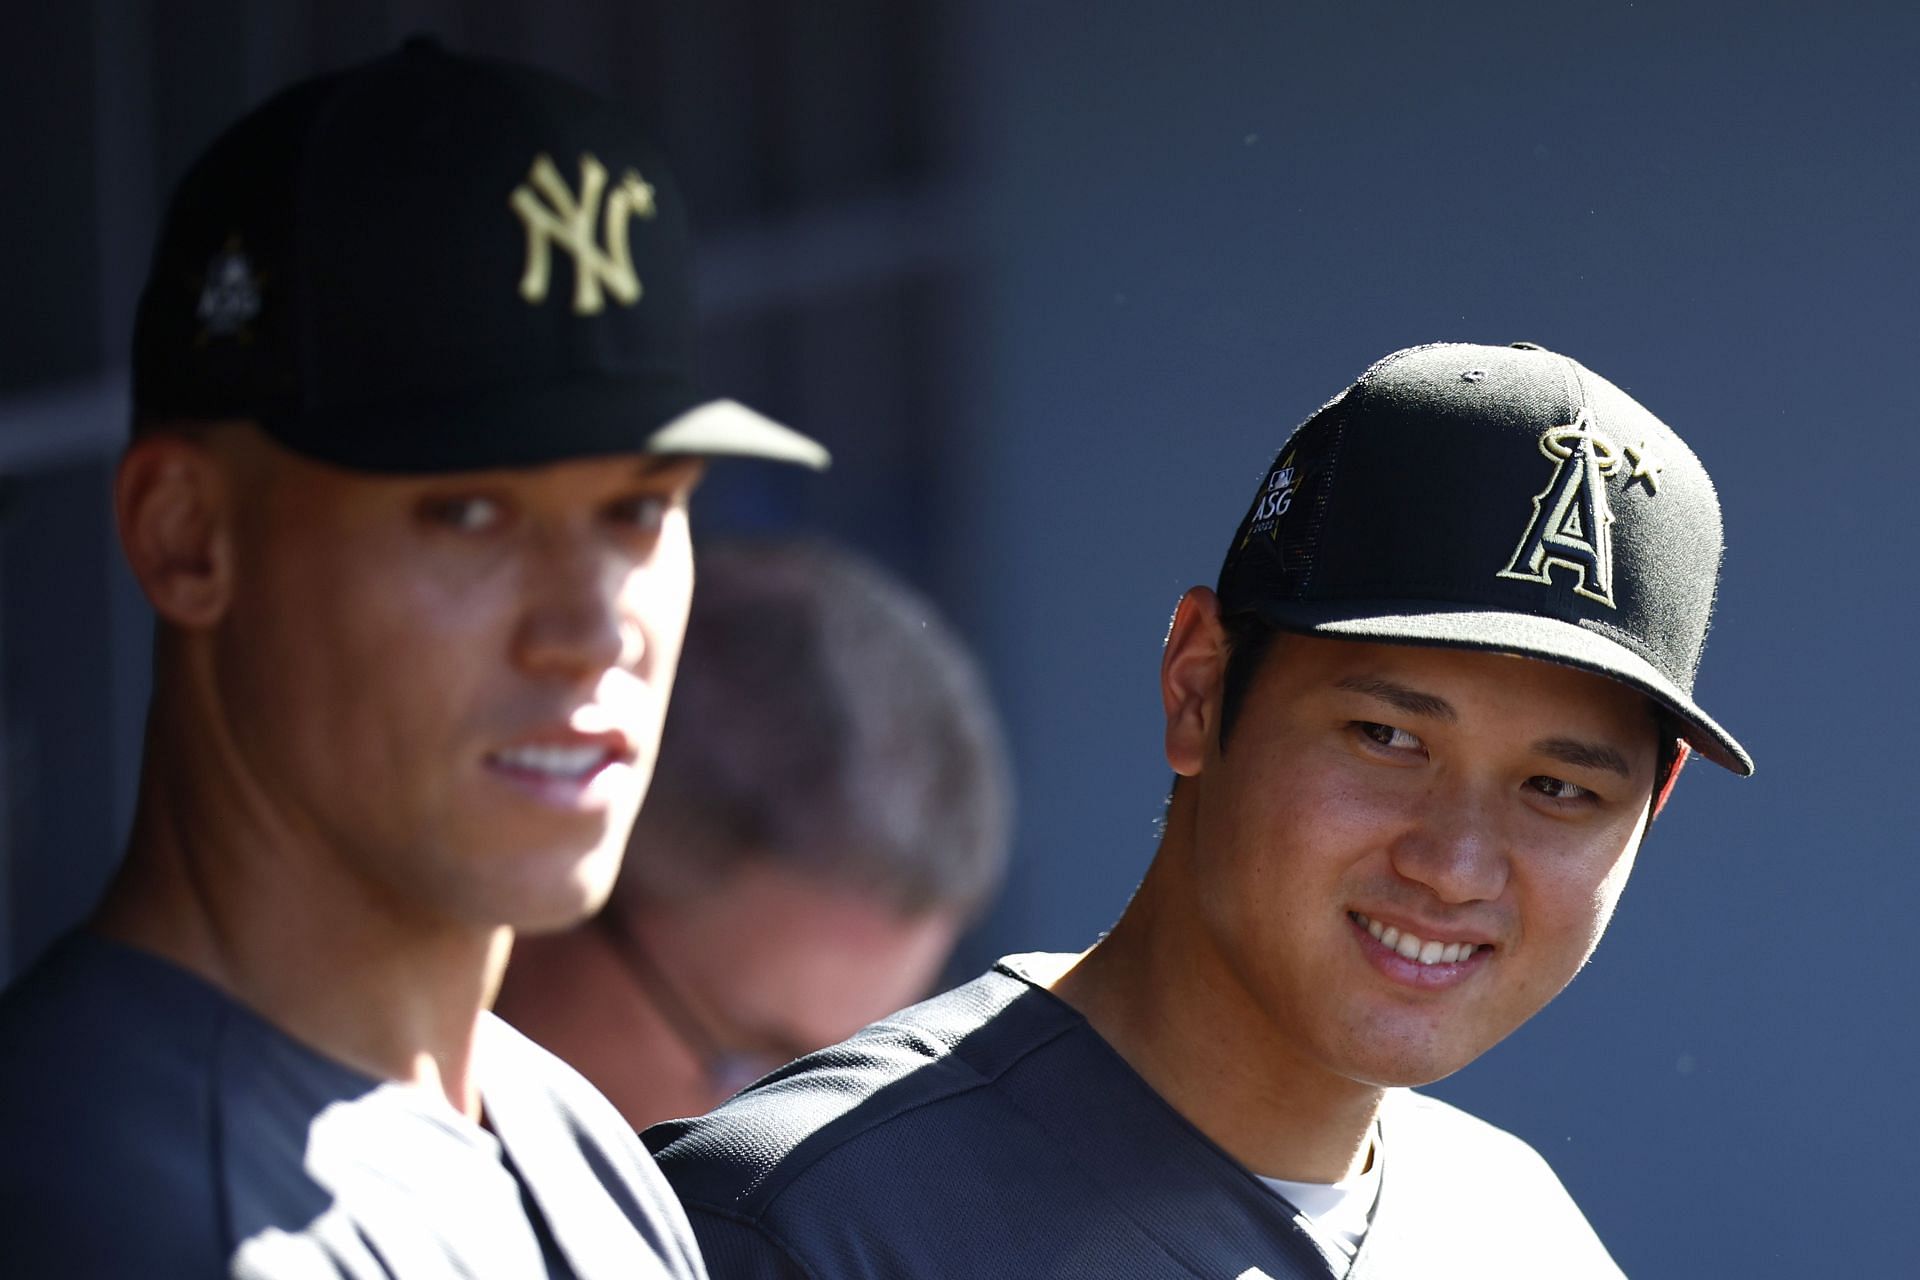 Aaron Judge #99 of the New York Yankees and Shohei Ohtani #17 of the Los Angeles Angels